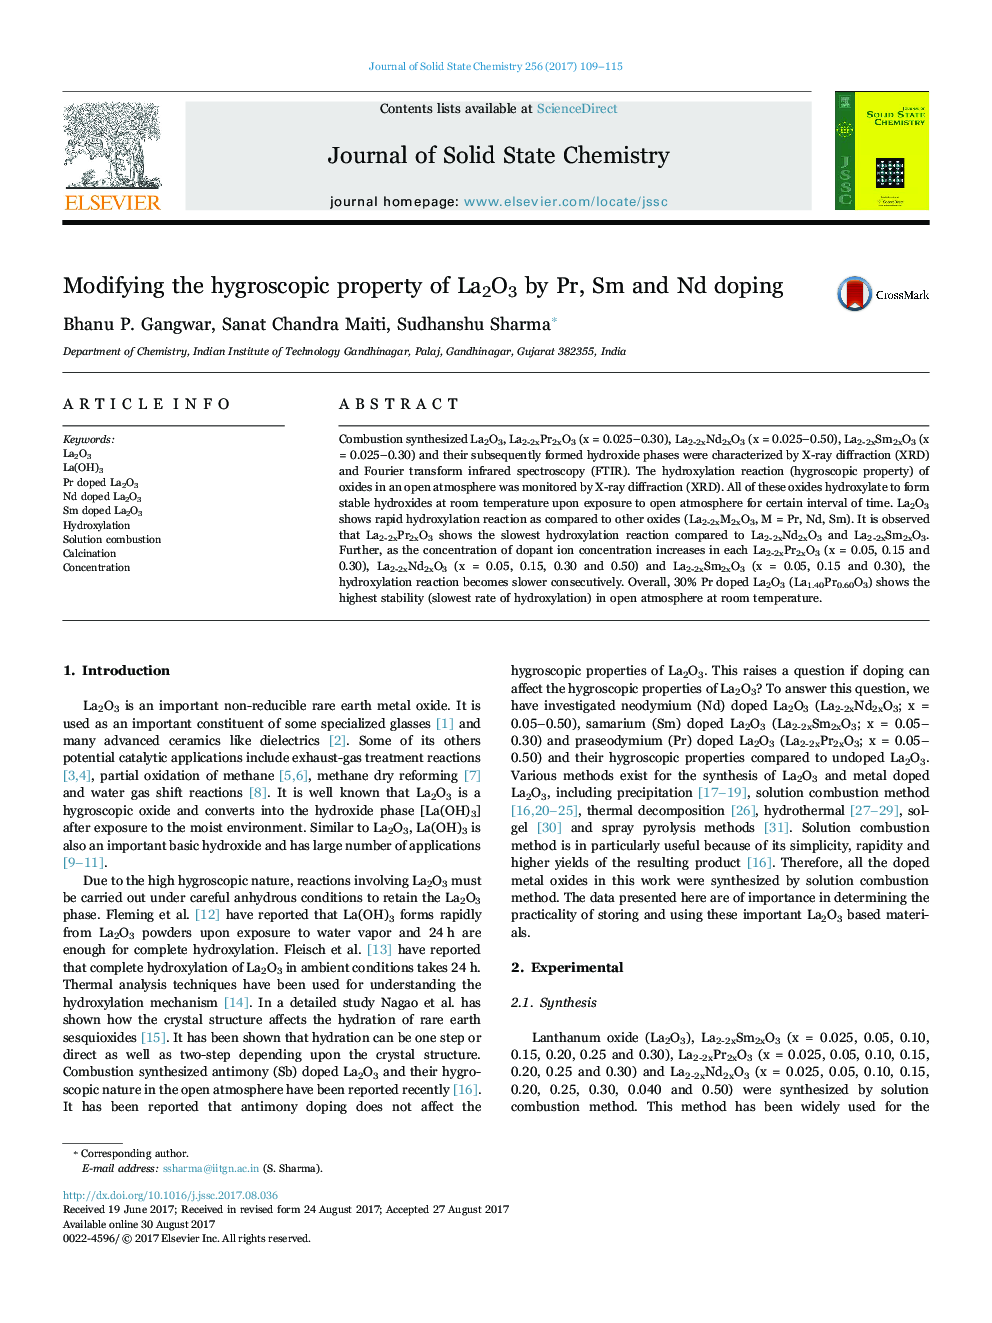 Modifying the hygroscopic property of La2O3 by Pr, Sm and Nd doping